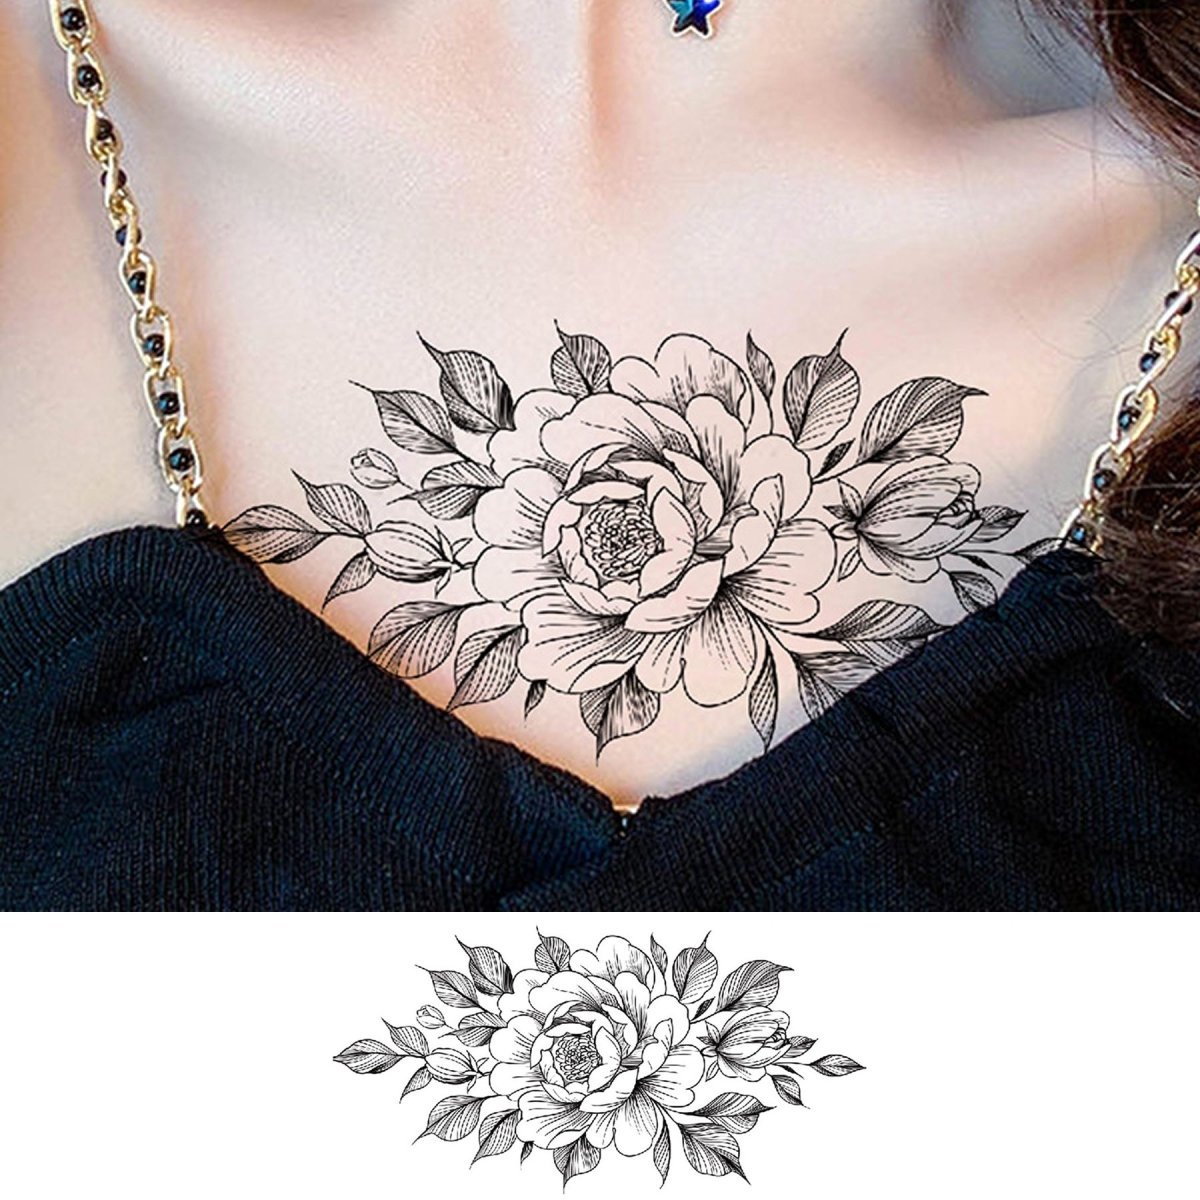 Details more than 235 female floral tattoos super hot